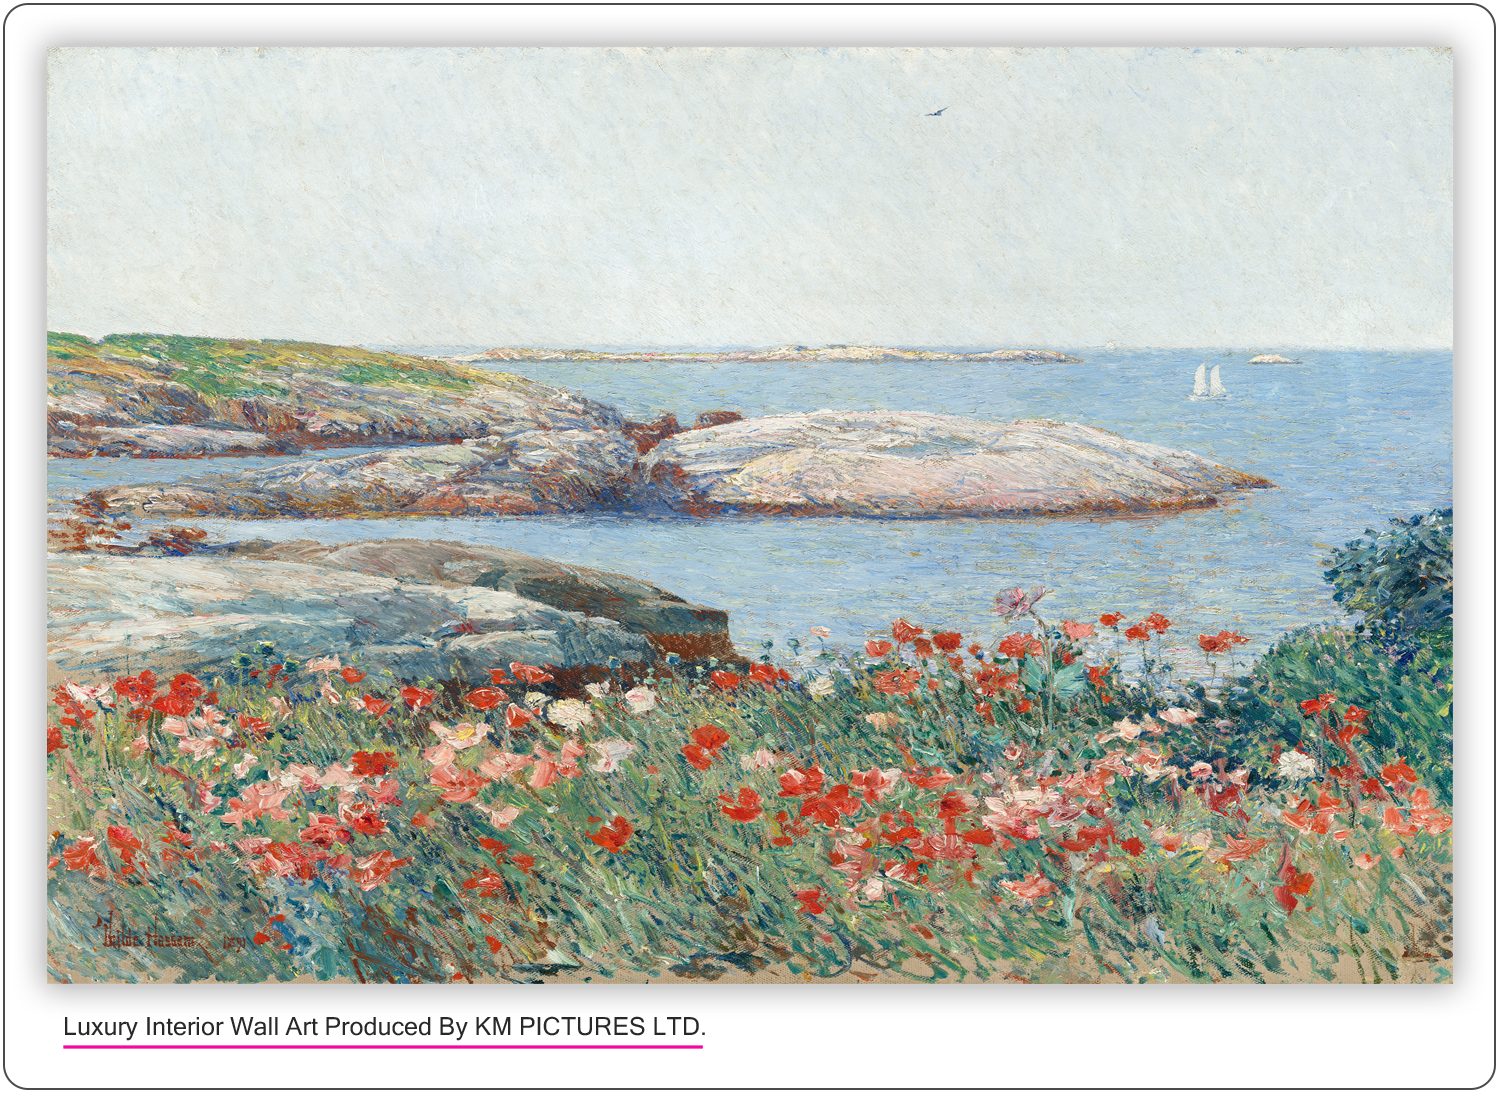 Poppies, Isles of Shoals, 1891